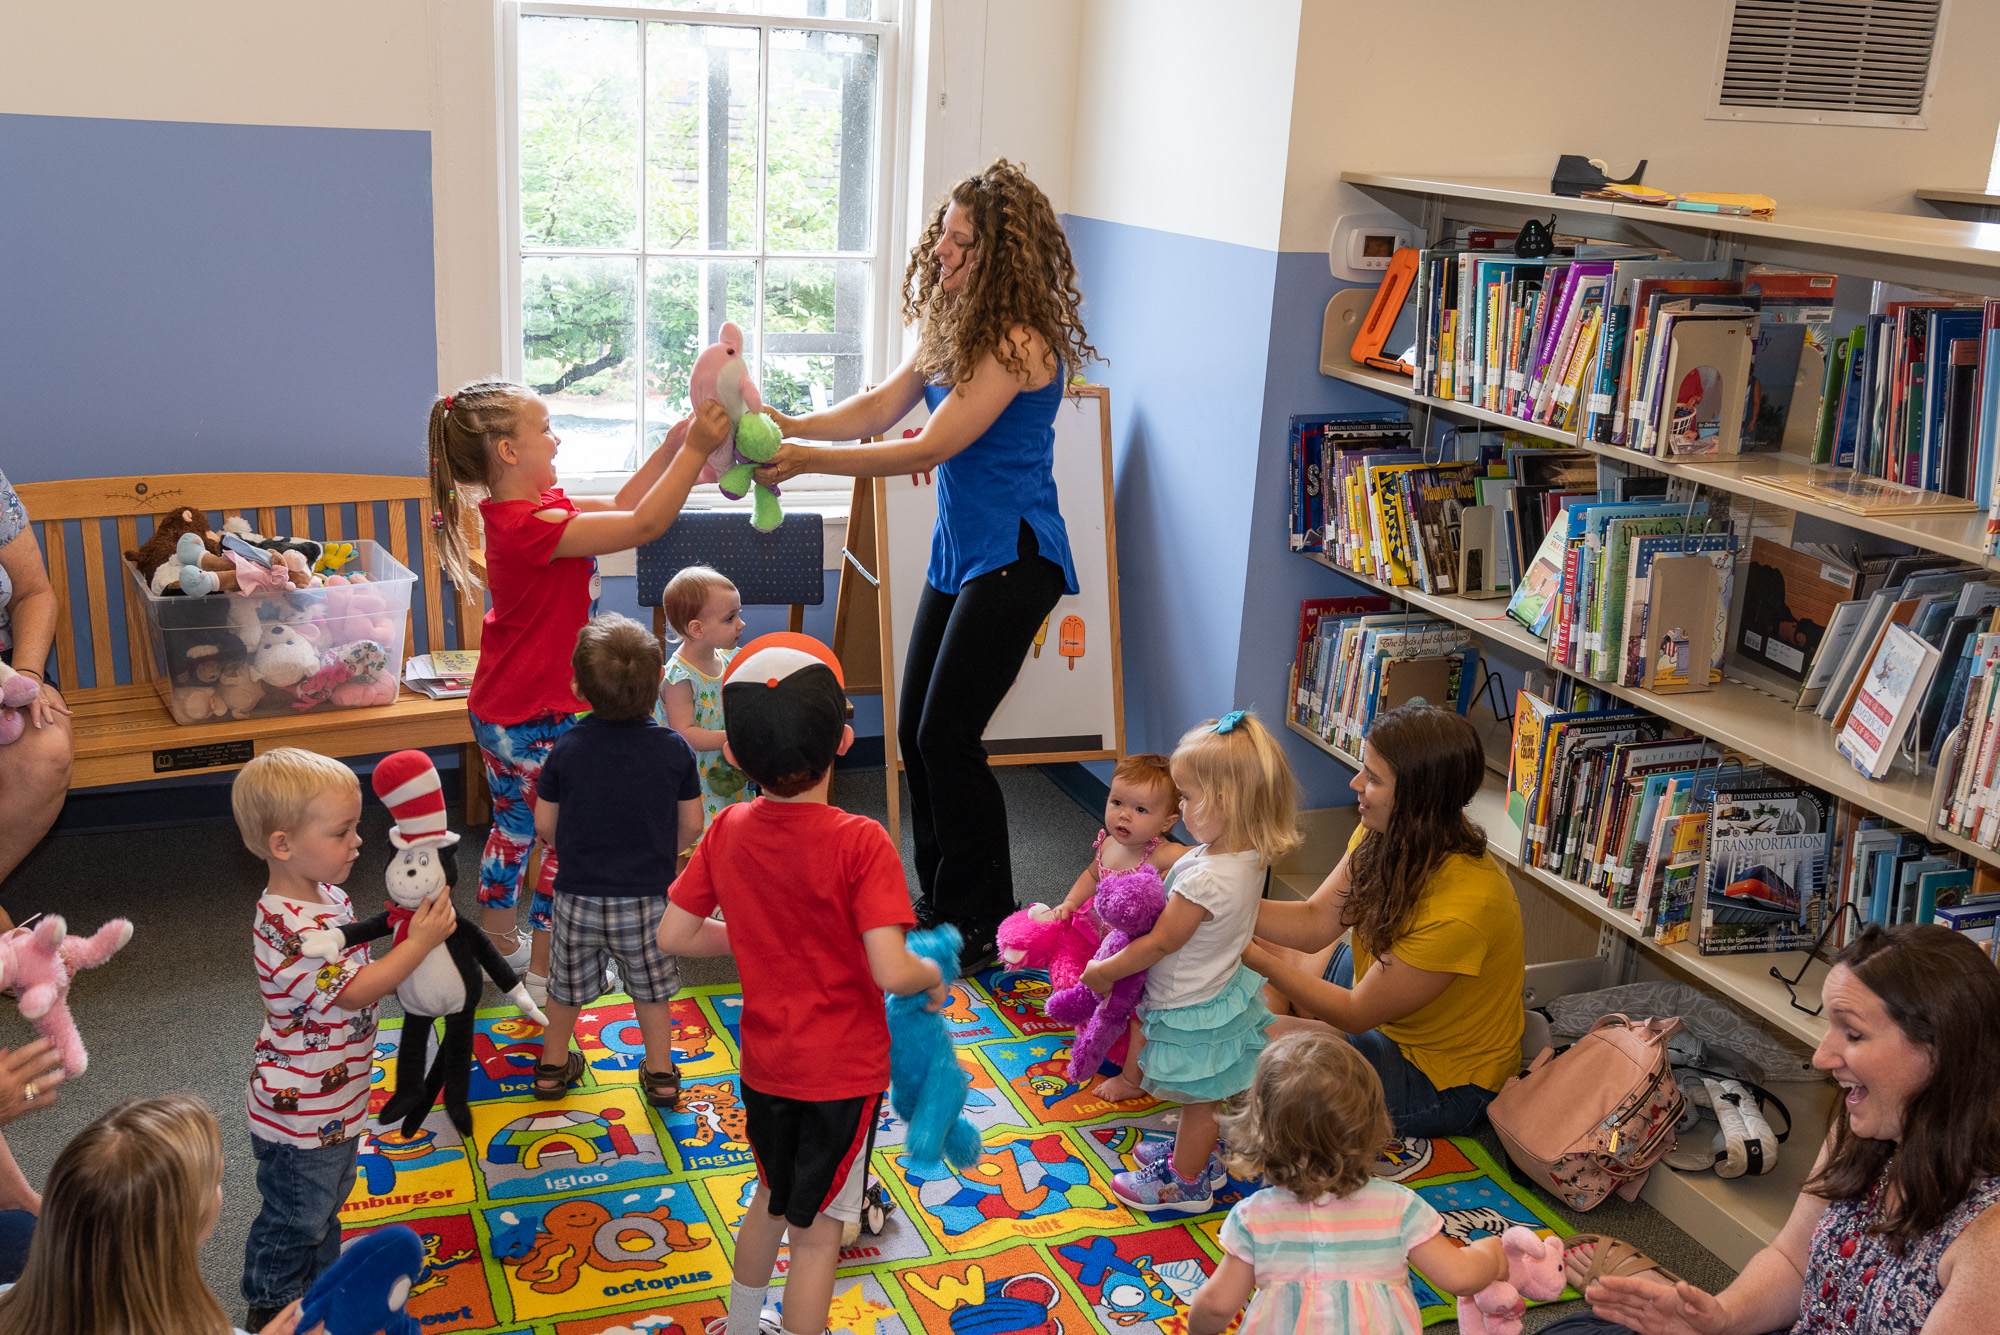 Color photo of Story Time at the Washington Street Library. Photo shows librarian leading a dance session with stuffed animals during story time .